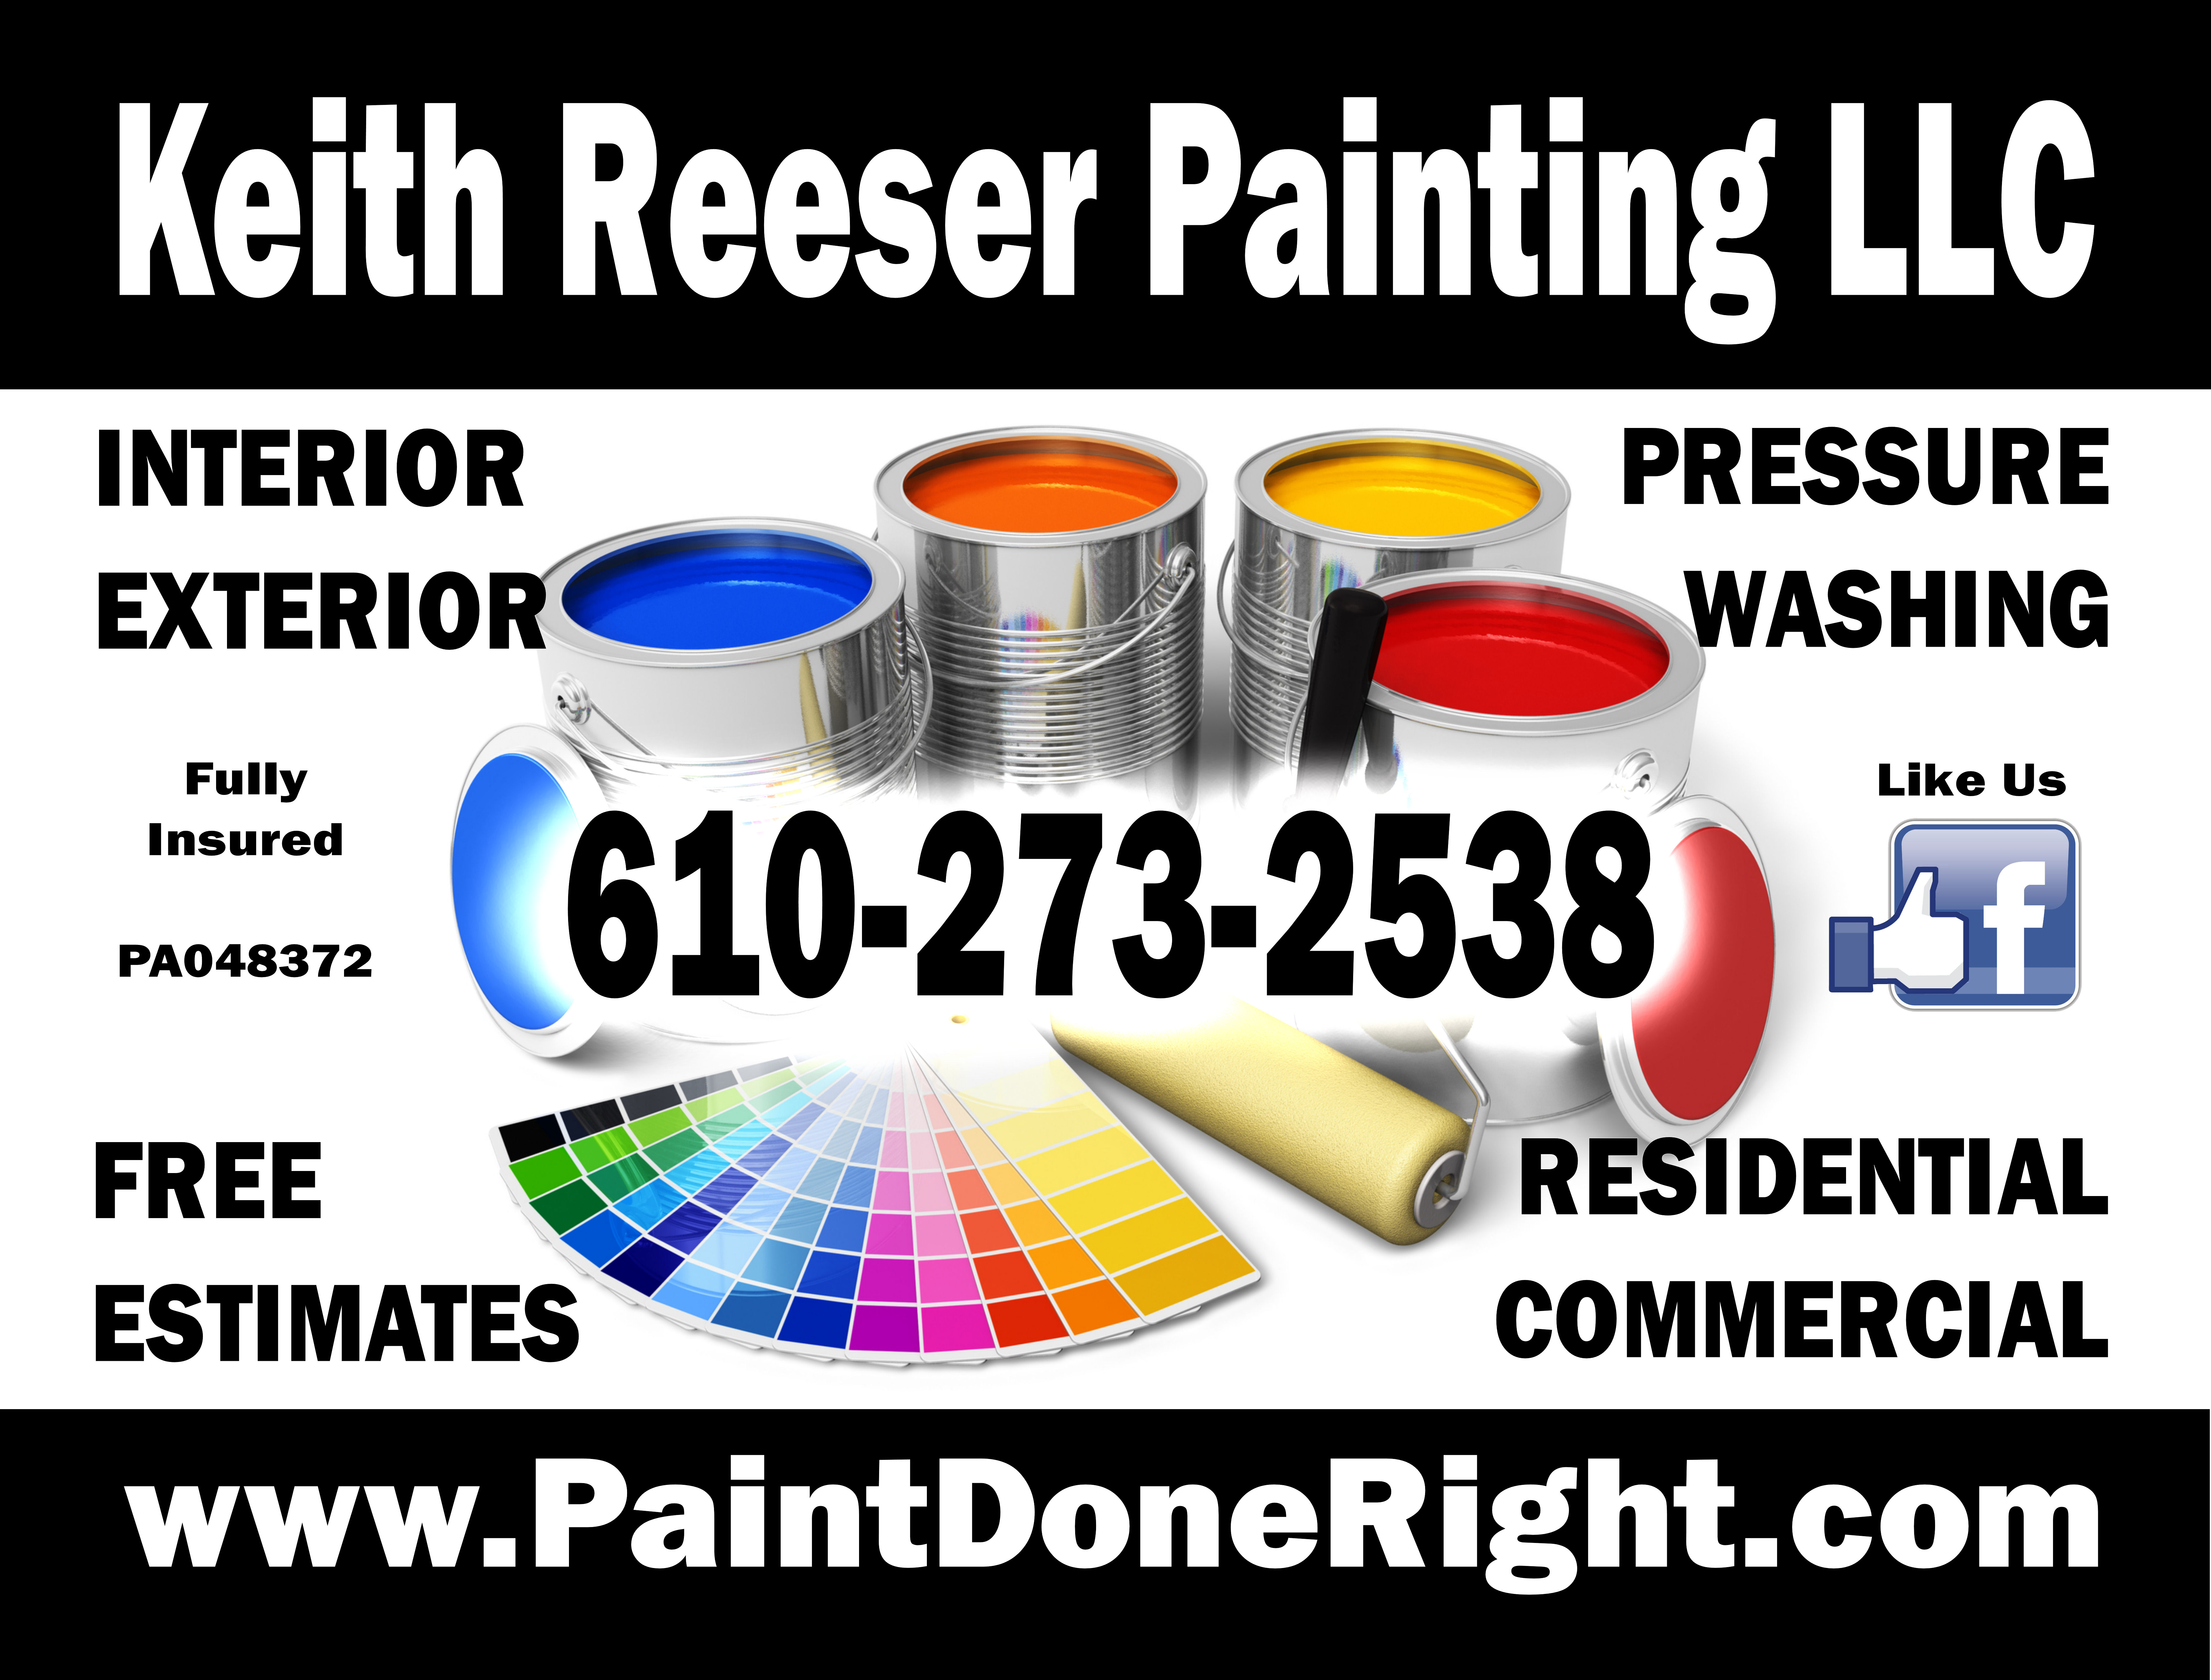 Chester County Painter - Keith Reeser Painting llc